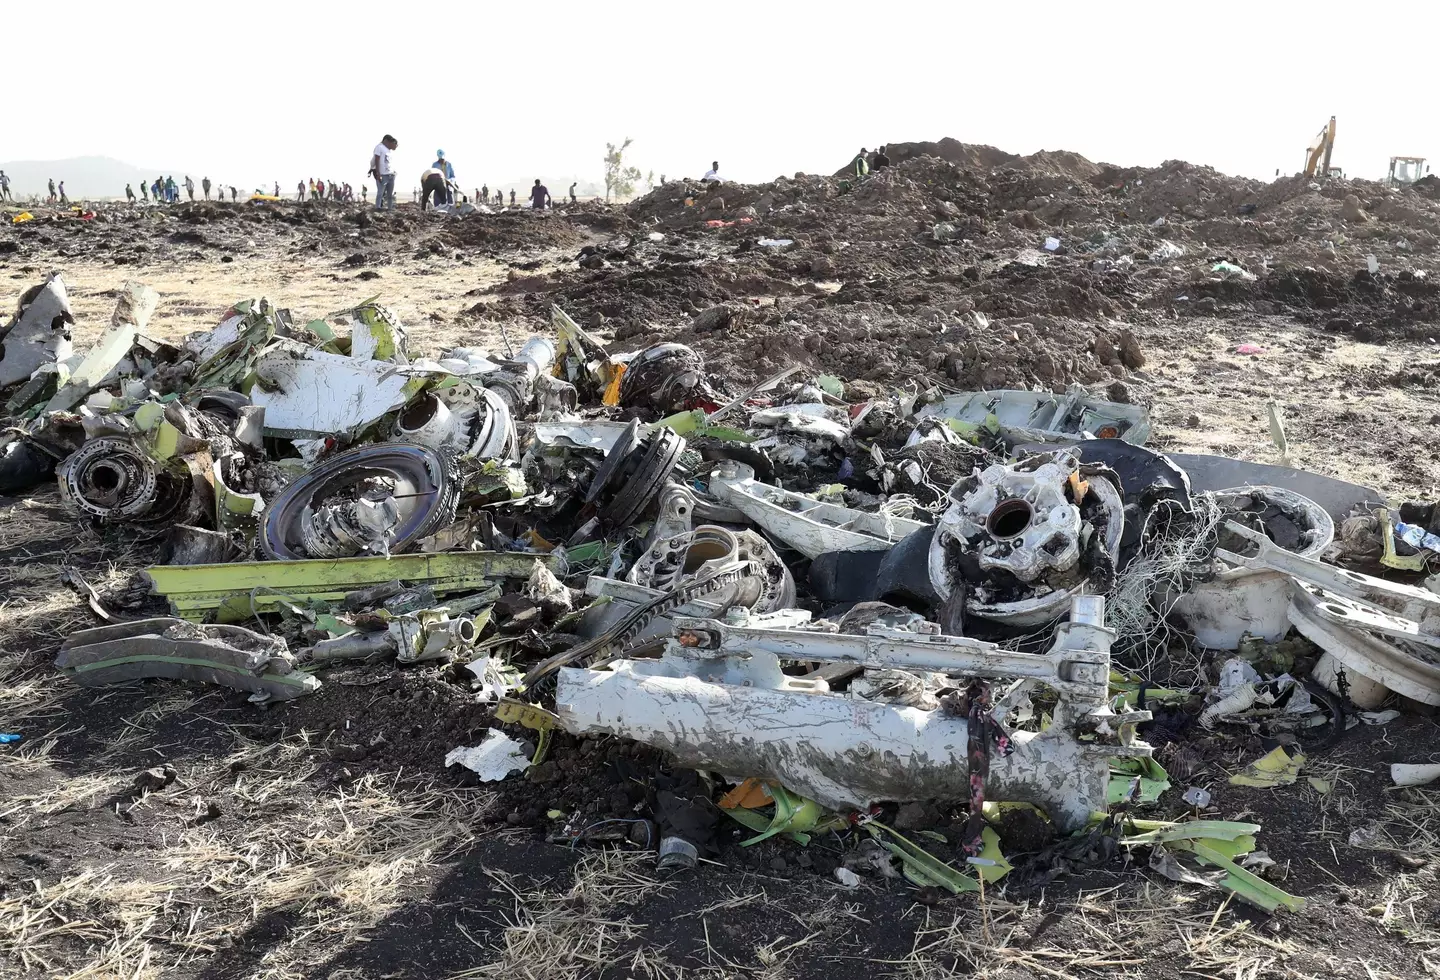 The wreckage of Ethiopian Airlines Flight 302.